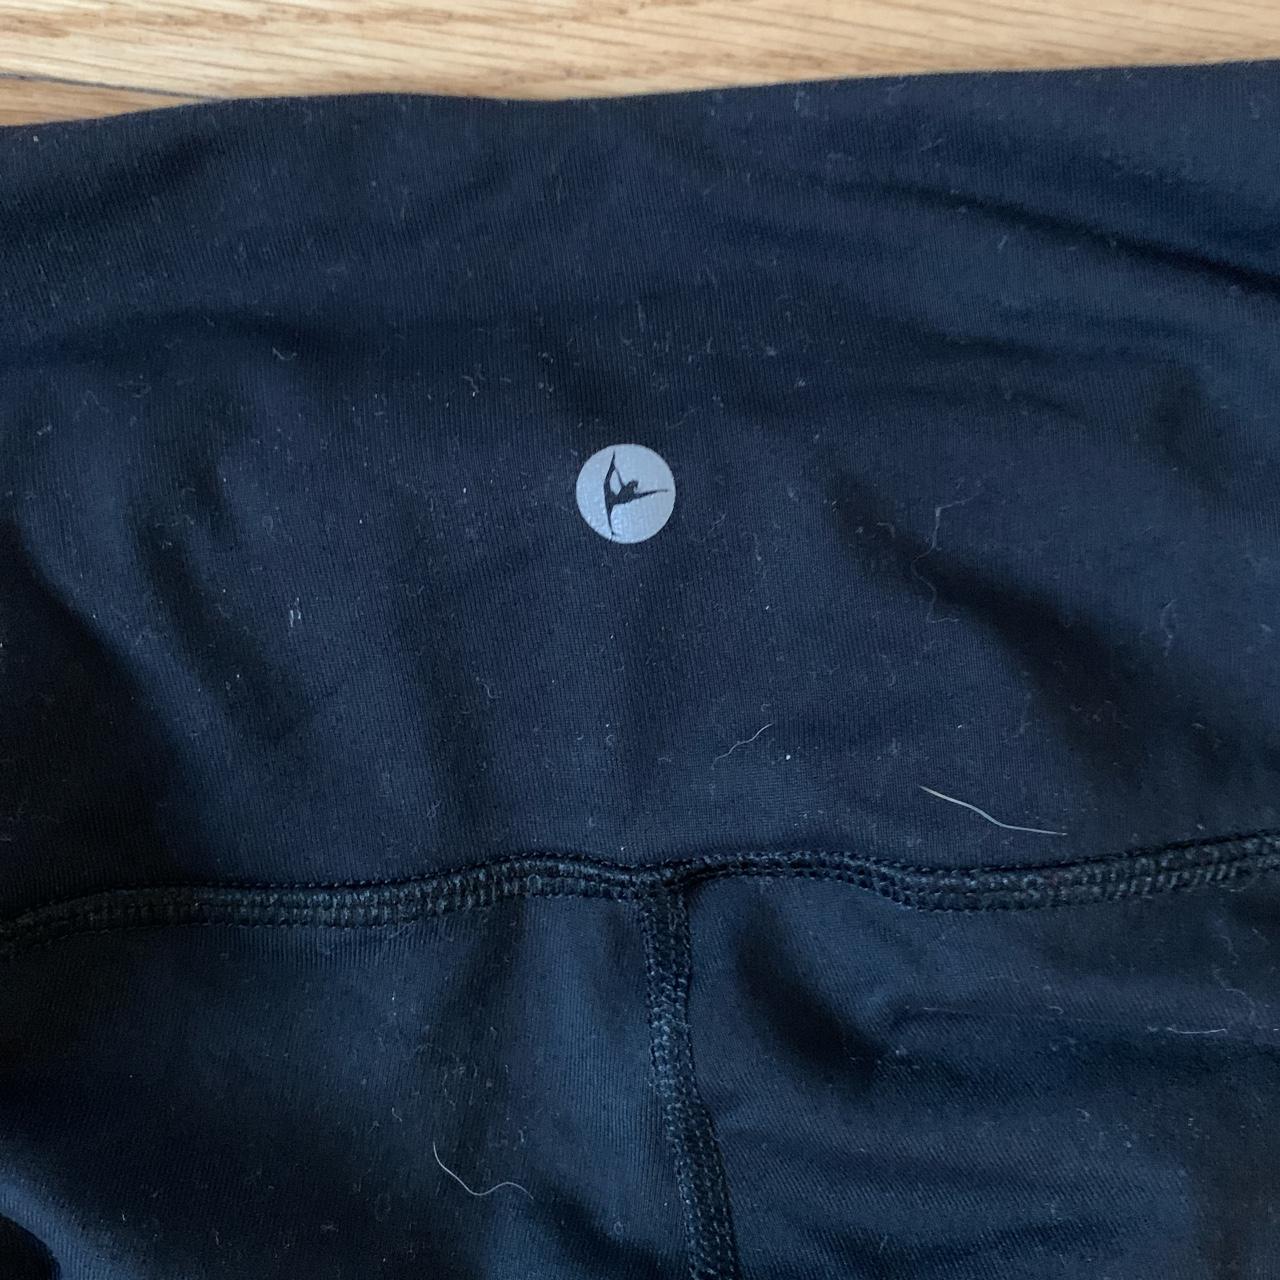 WORN ONCE!!!!! LULULEMON DUPES! SIZE SMALL BUT FIT A - Depop